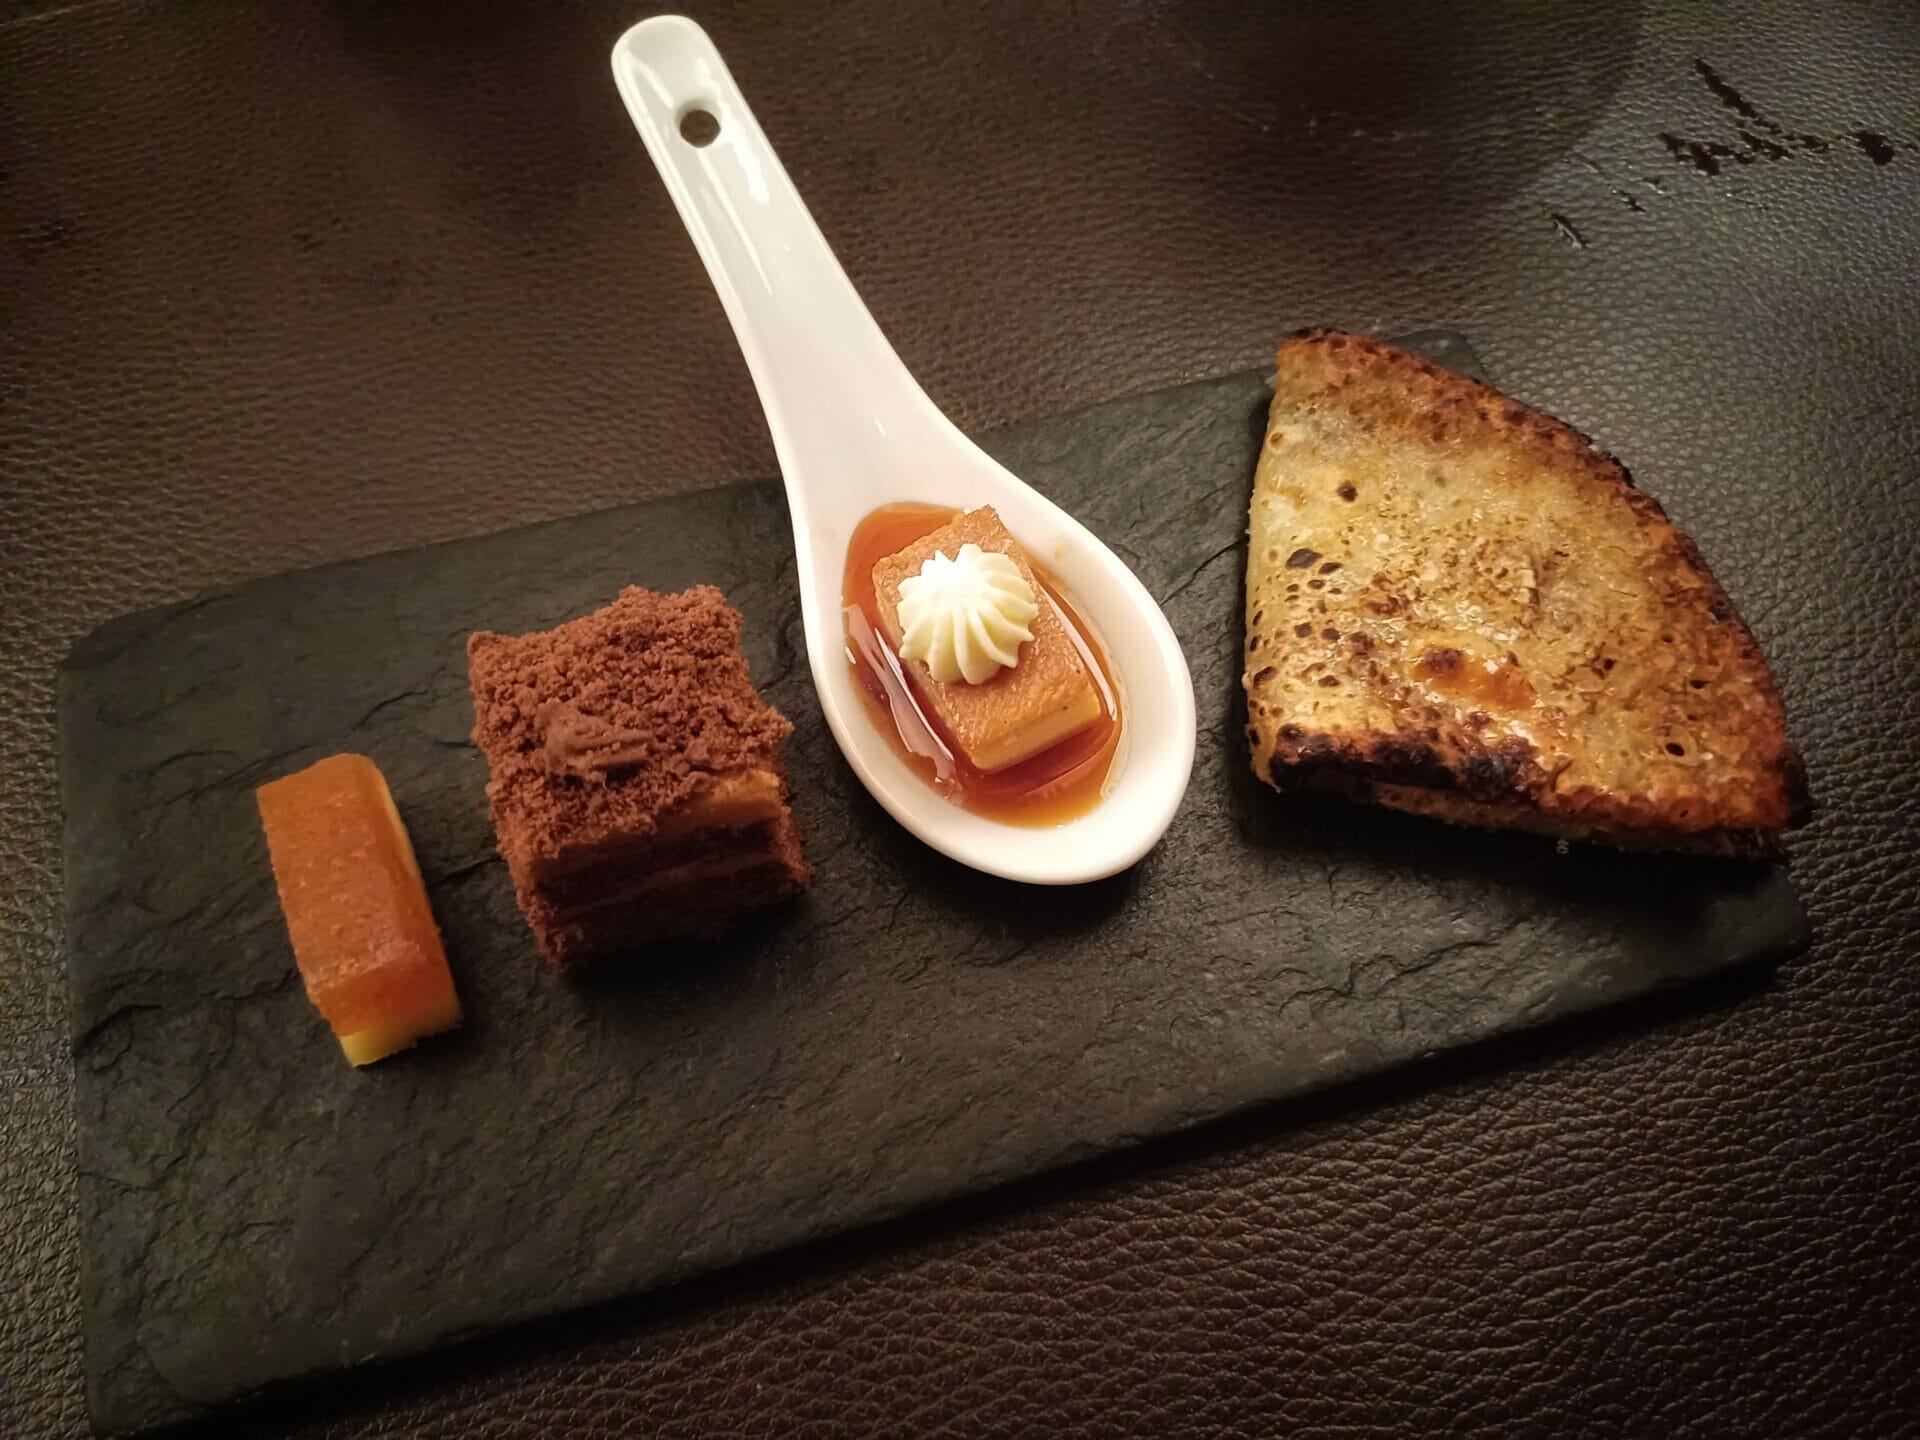 A selection of argentinian desserts on a black tray, from left to right: queso y dulce, chocotorta, flan and panqueque with dulce de leche,